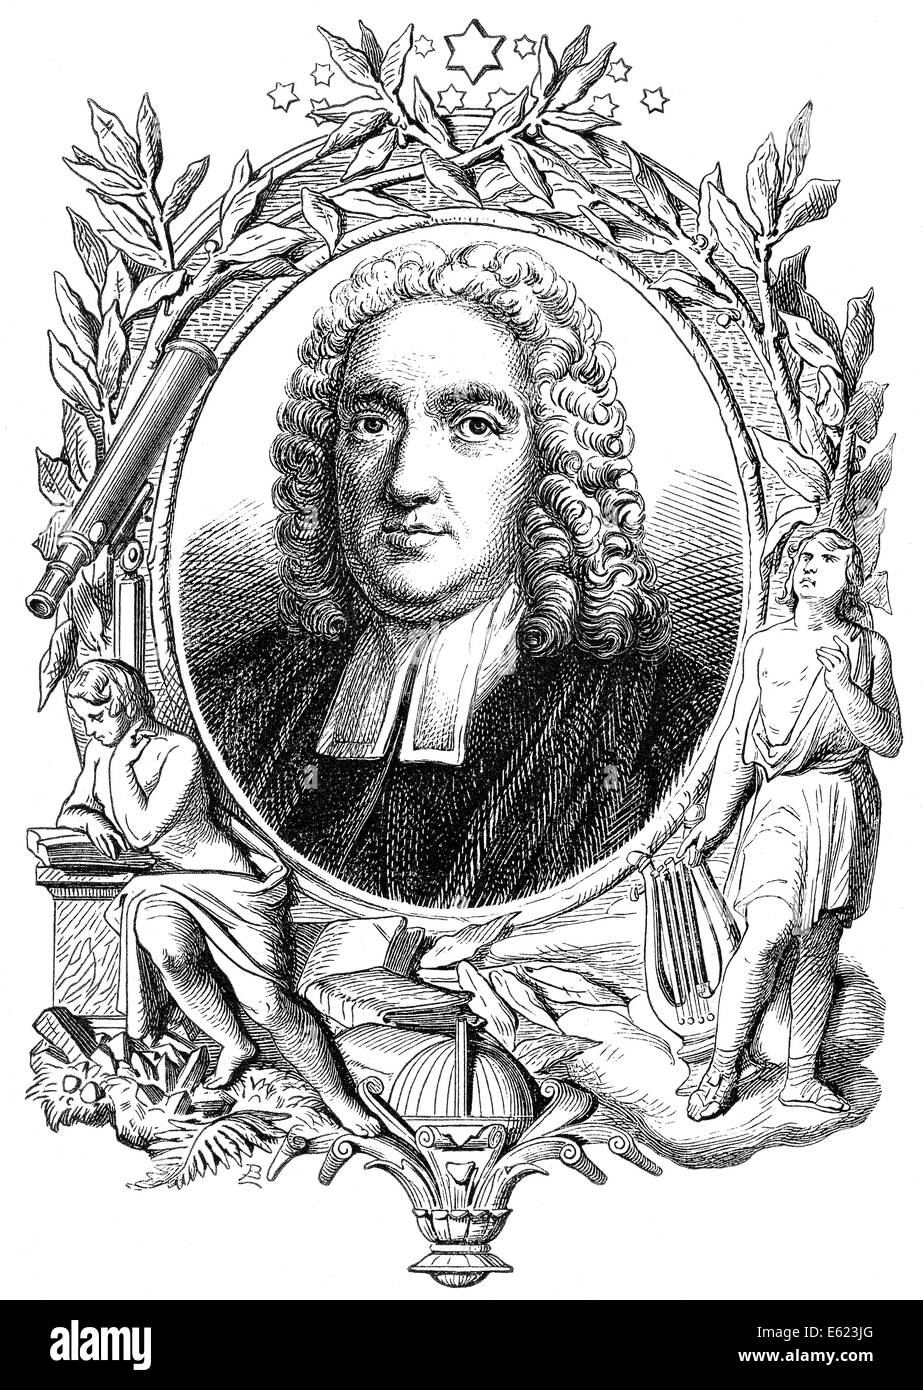 Jonathan Swift or Isaac Bickerstaff, 1667 - 1745, an Irish writer and satirist of the early Enlightenment, author of Gulliver's Stock Photo